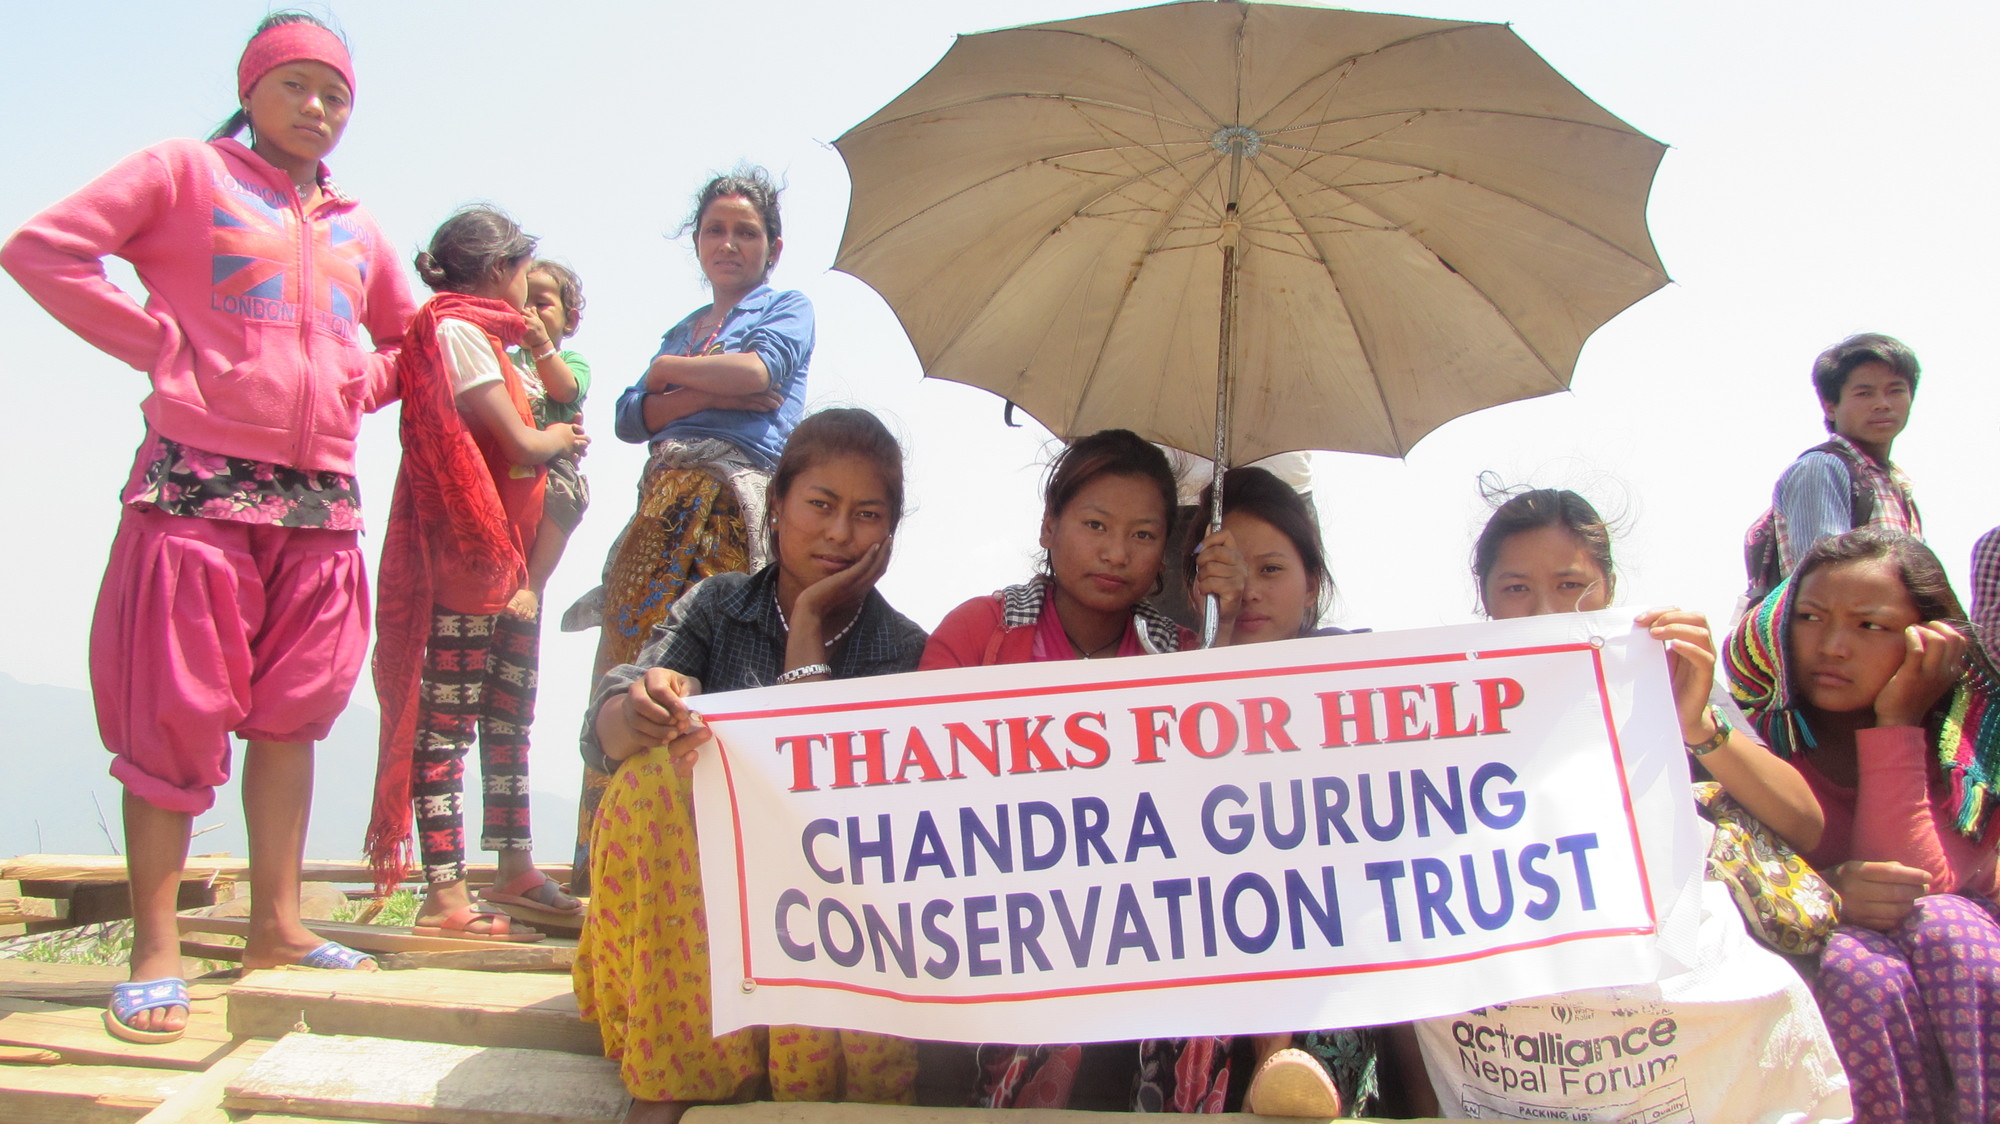 Villagers in Nepal thanking The Chandra Gurung Conservation Trust for their relief efforts.